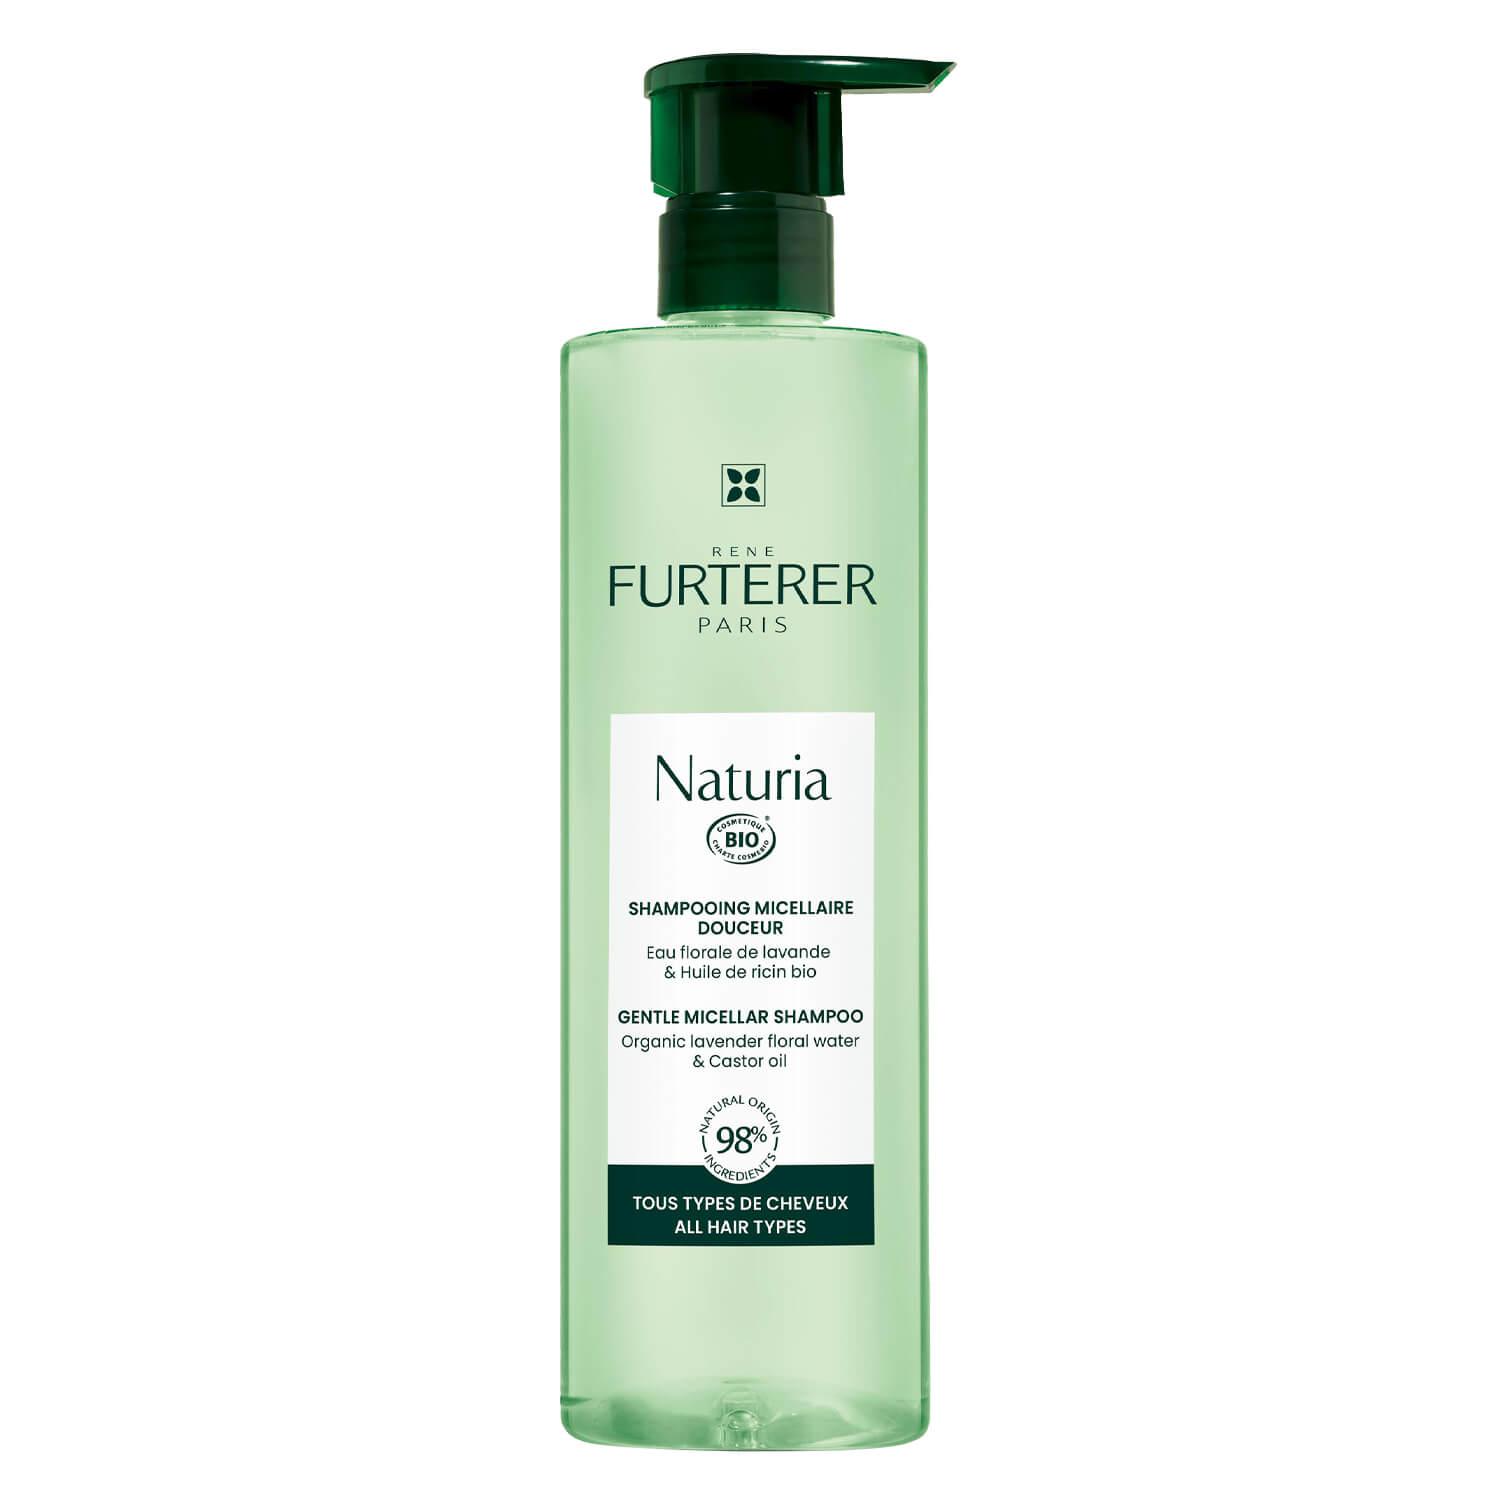 Naturia - Shampooing micellaire douceur